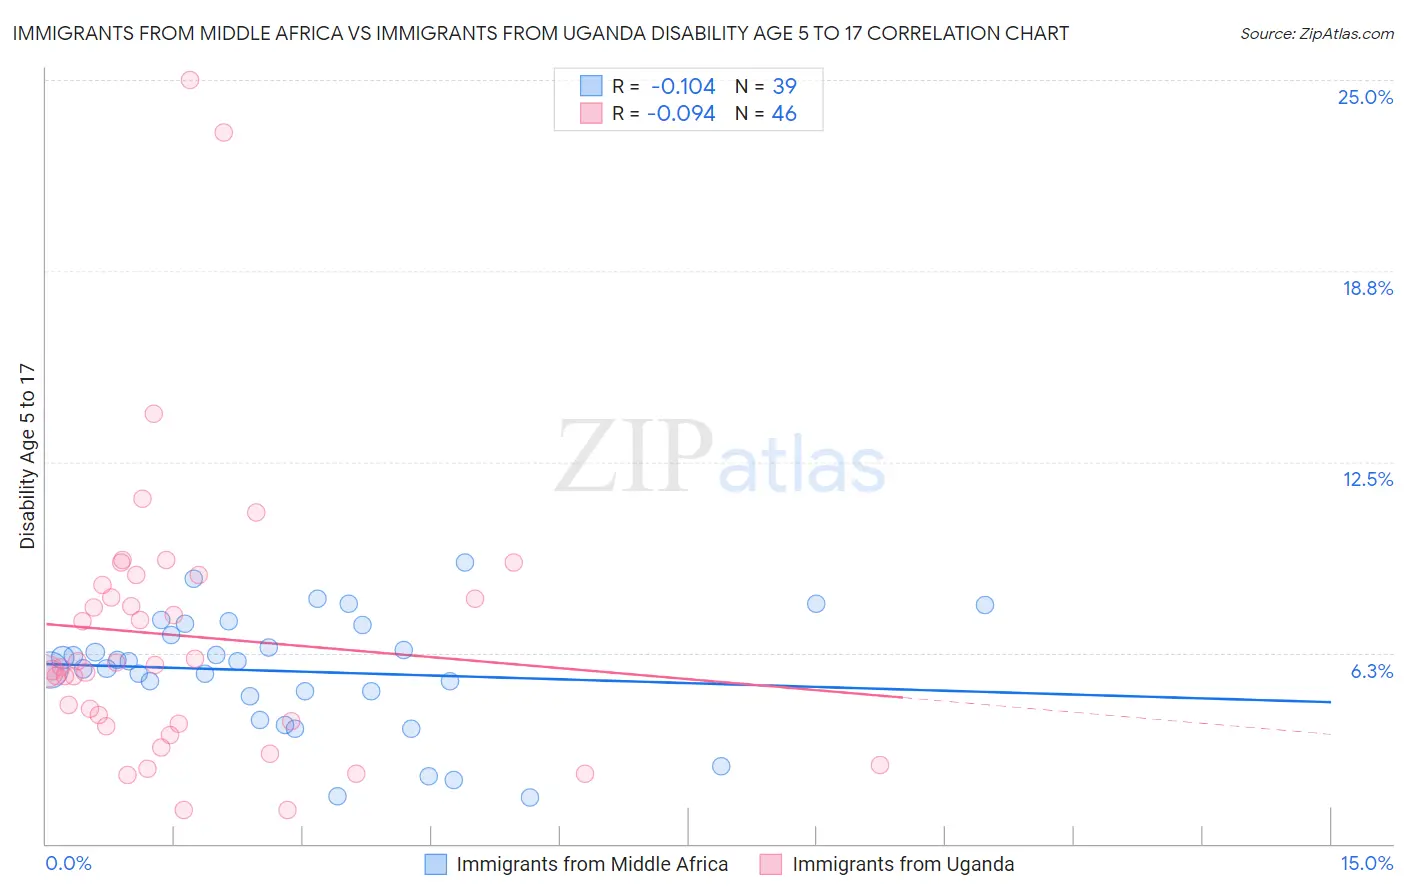 Immigrants from Middle Africa vs Immigrants from Uganda Disability Age 5 to 17